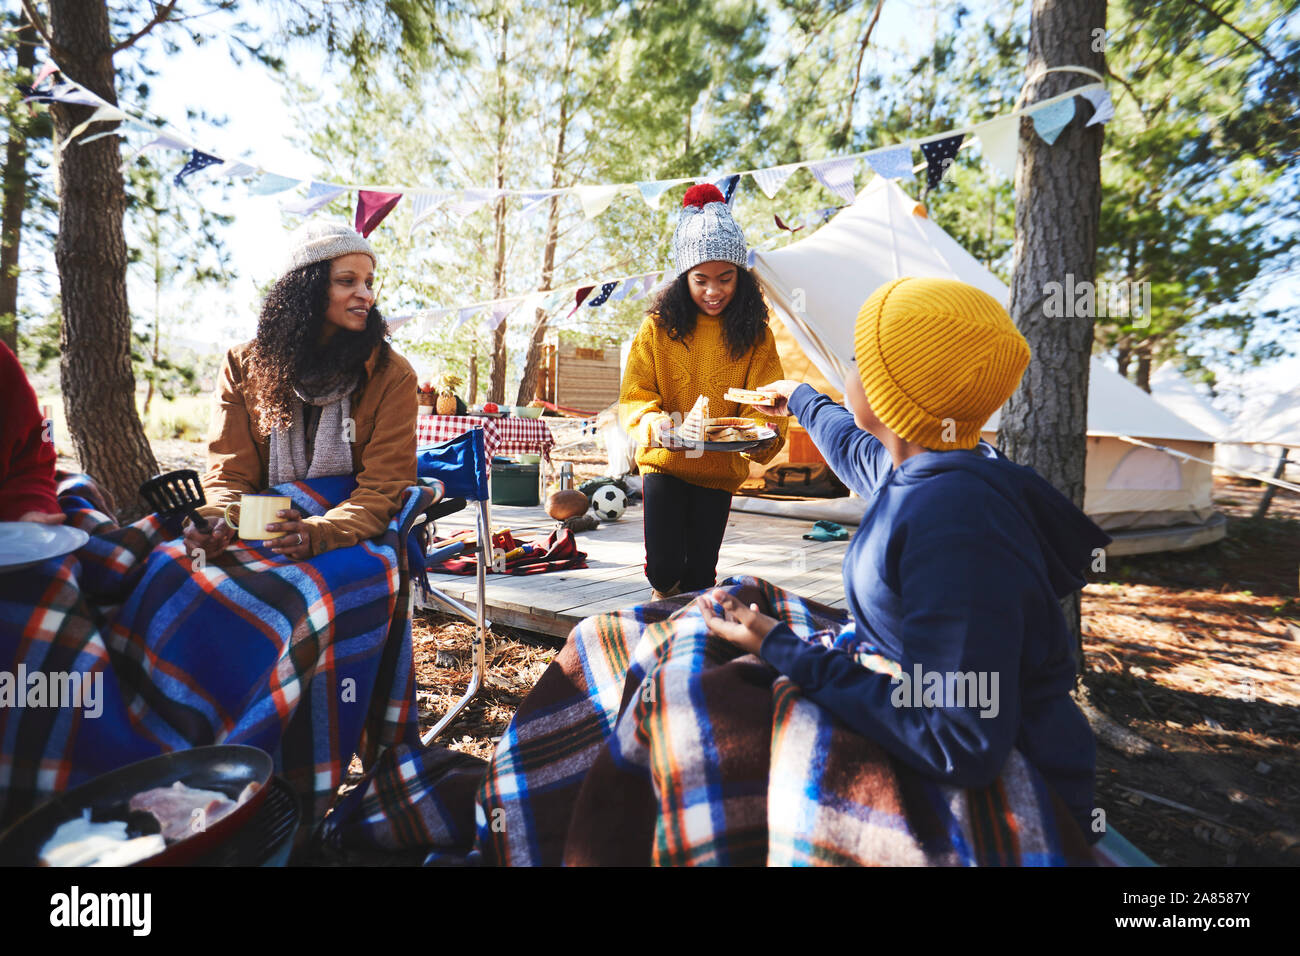 Family eating at campsite in woods Stock Photo